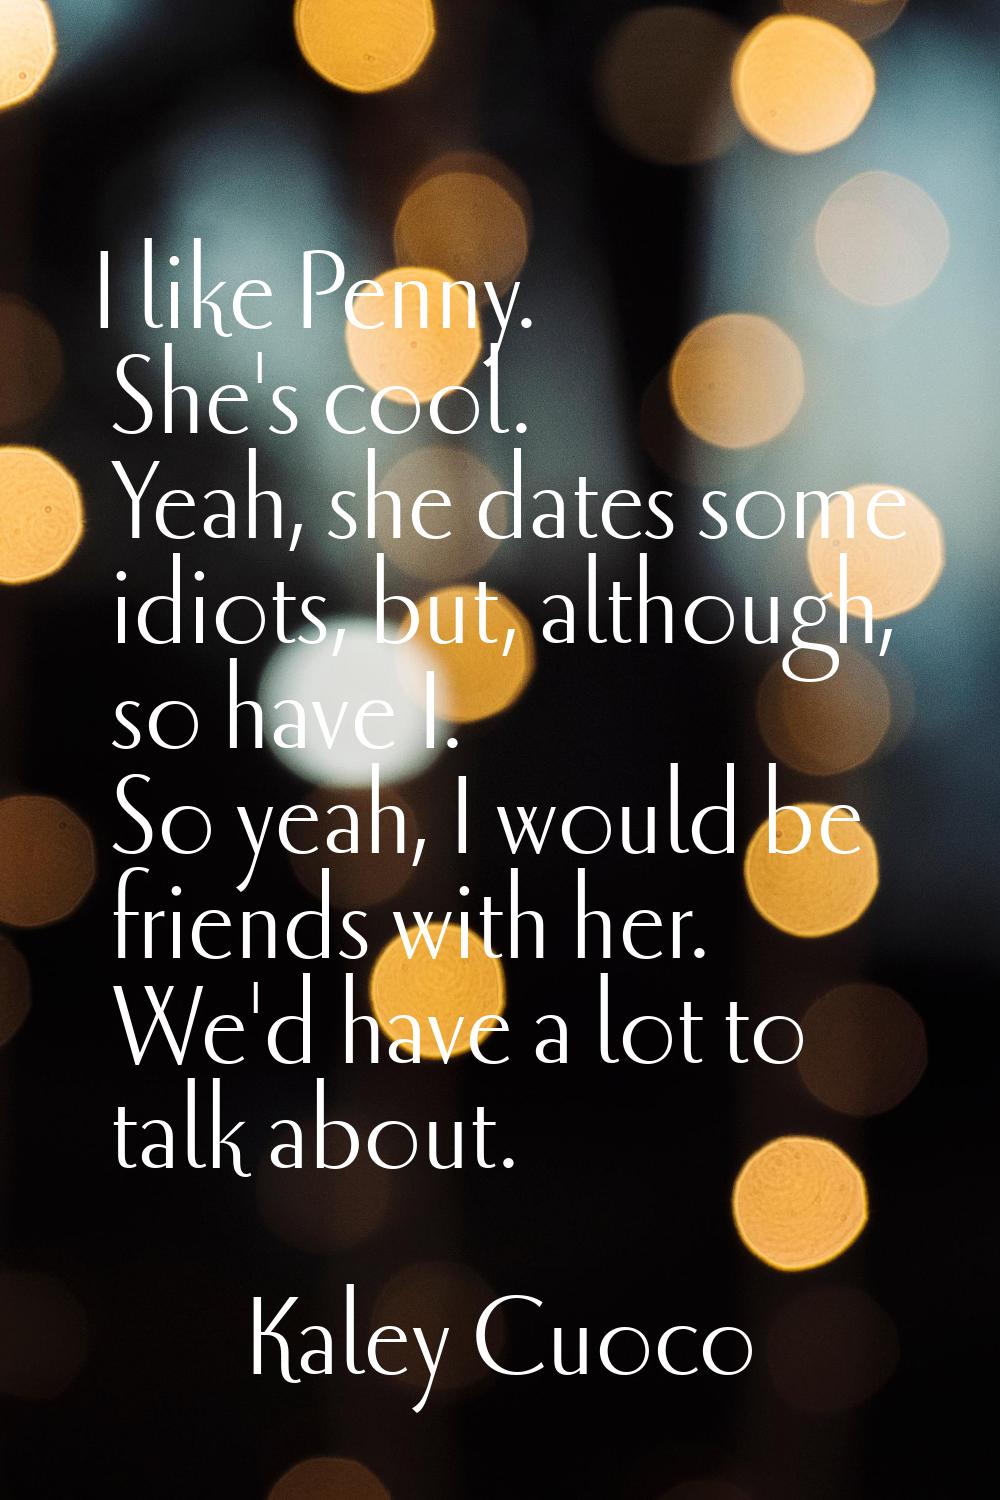 I like Penny. She's cool. Yeah, she dates some idiots, but, although, so have I. So yeah, I would b